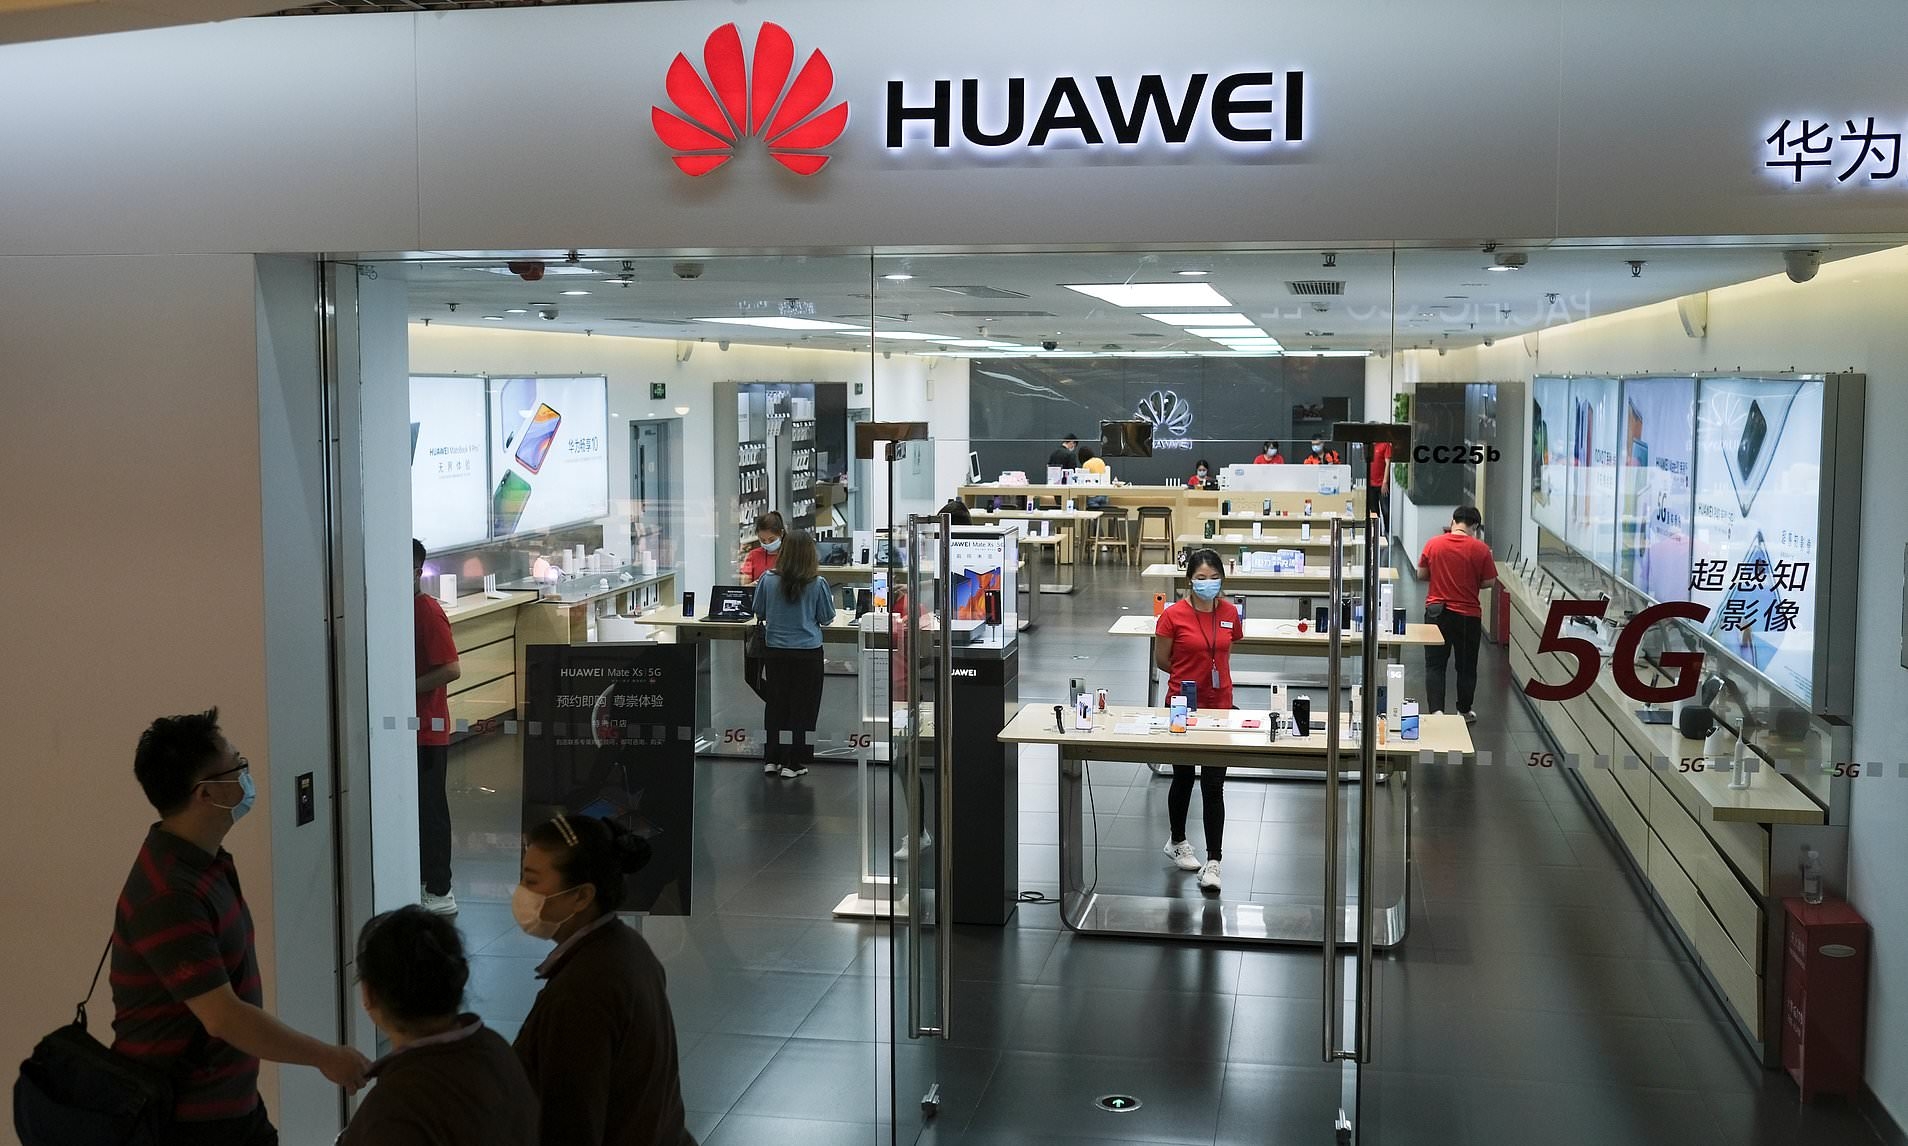 Around 60 Conservative MPs are threatening to thwart Johnson's legislative agenda if he doesn’t agree to accelerate the removal of the Chinese telecoms firm Huawei from the UK's 5G network